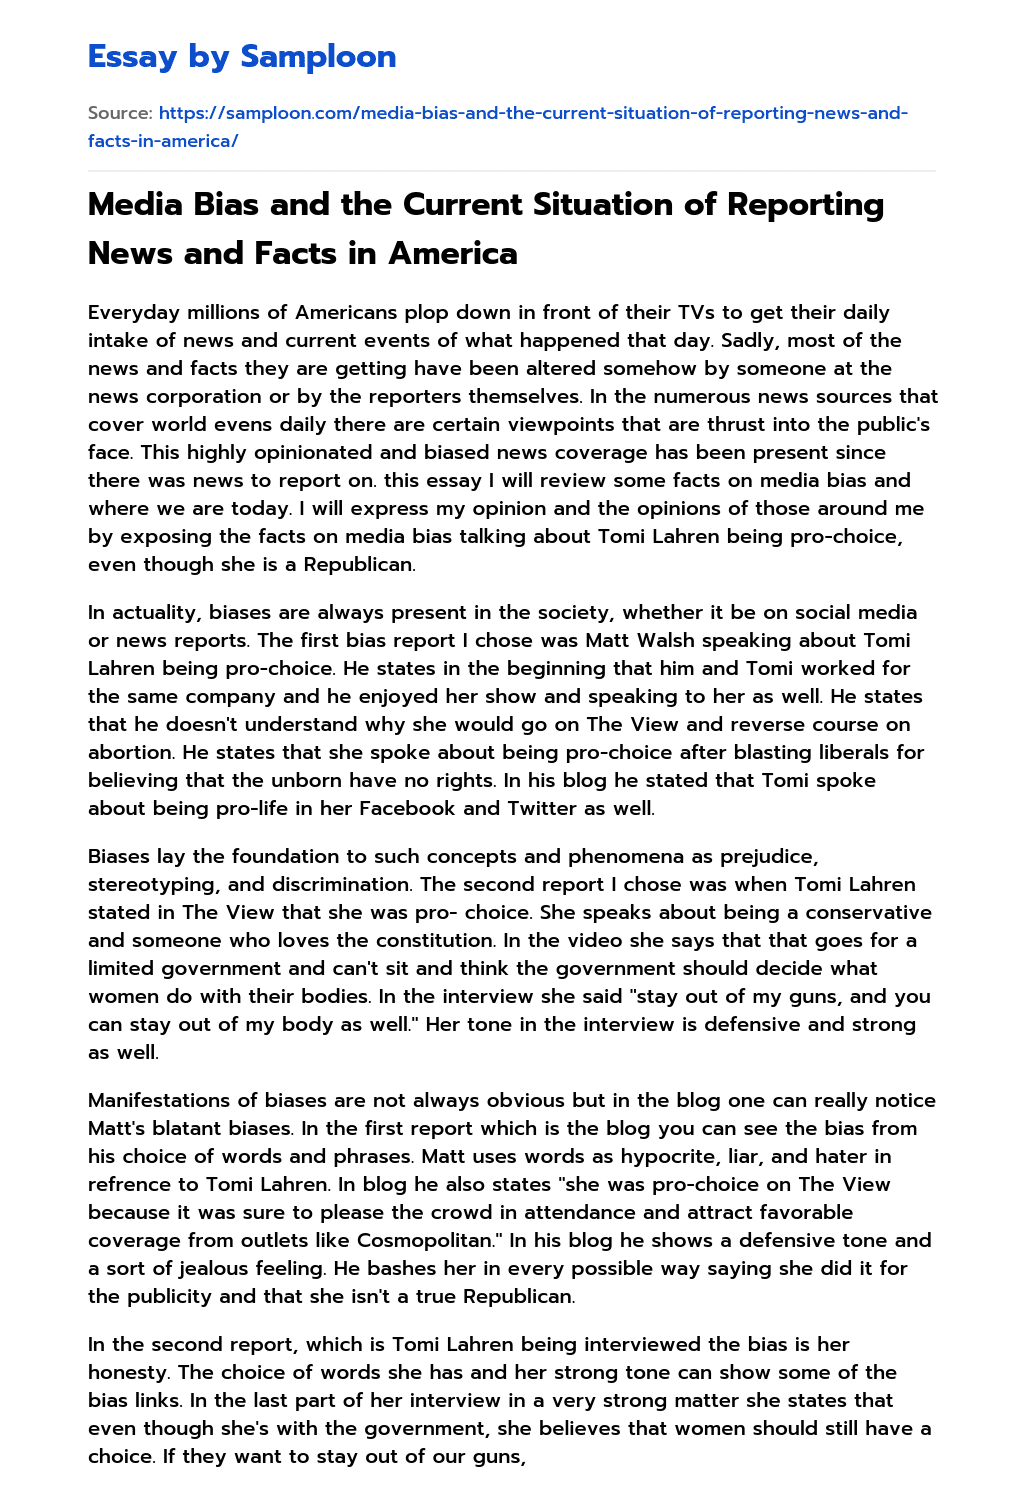 Media Bias and the Current Situation of Reporting News and Facts in America essay